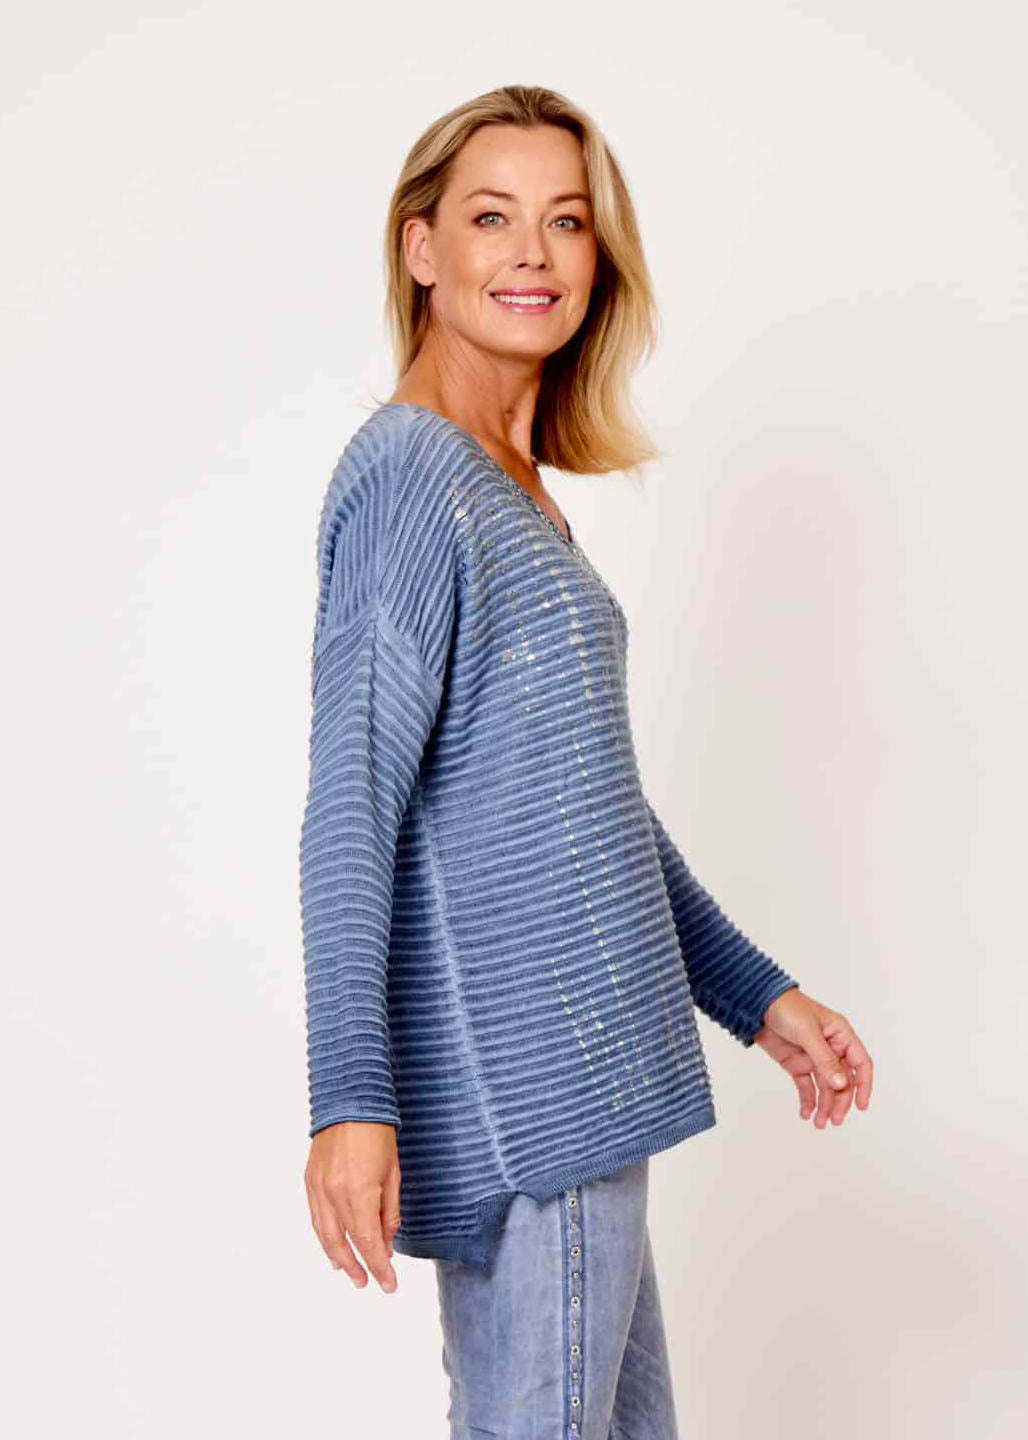 LA STRADA FOILED KNITTED TOP